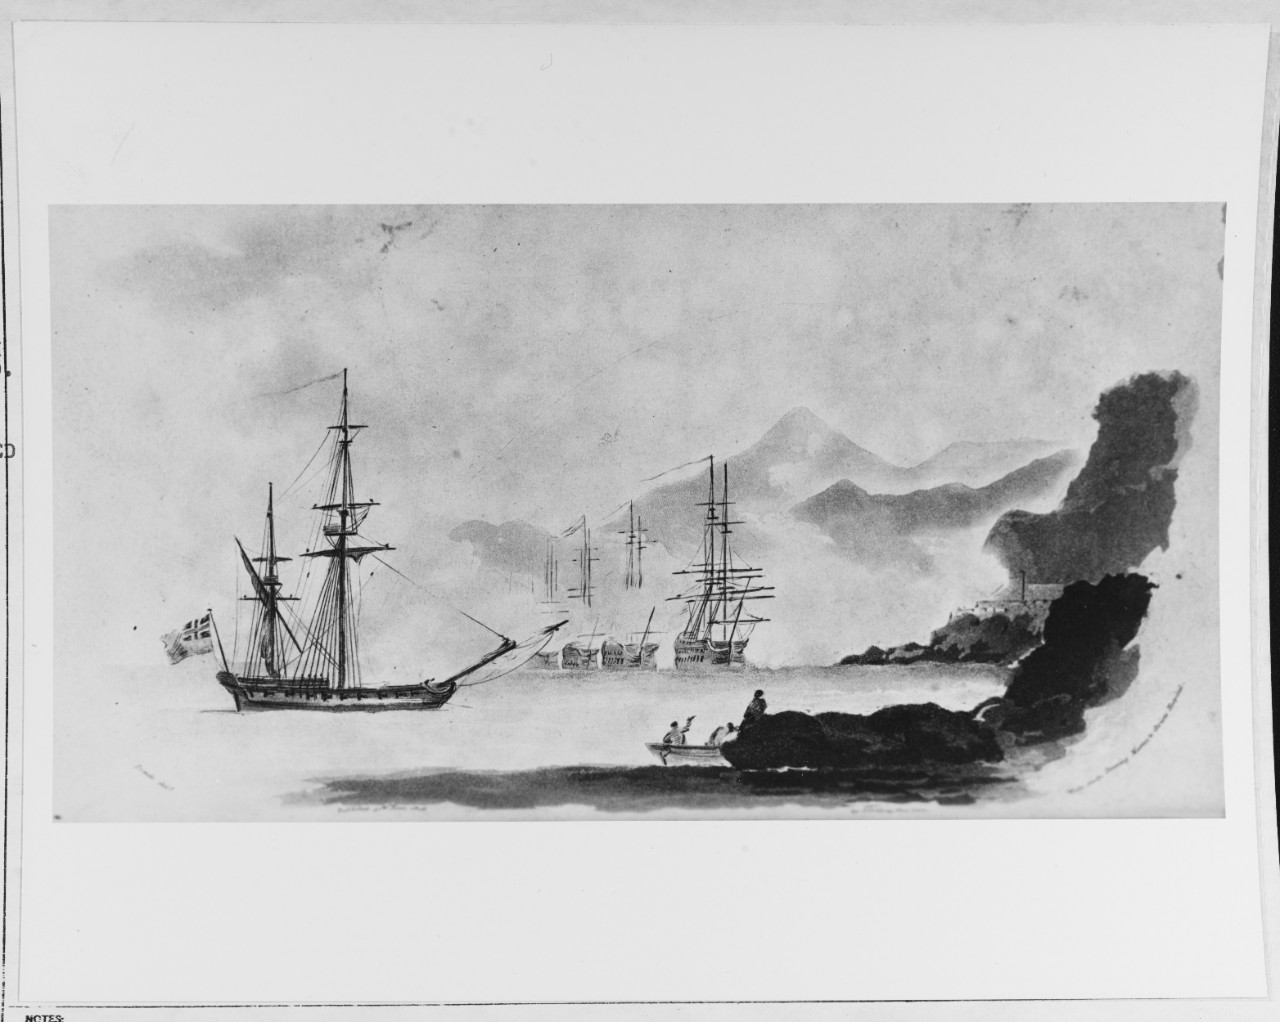 "Sir John Moores attack off Basse Terre Guadaloupe."